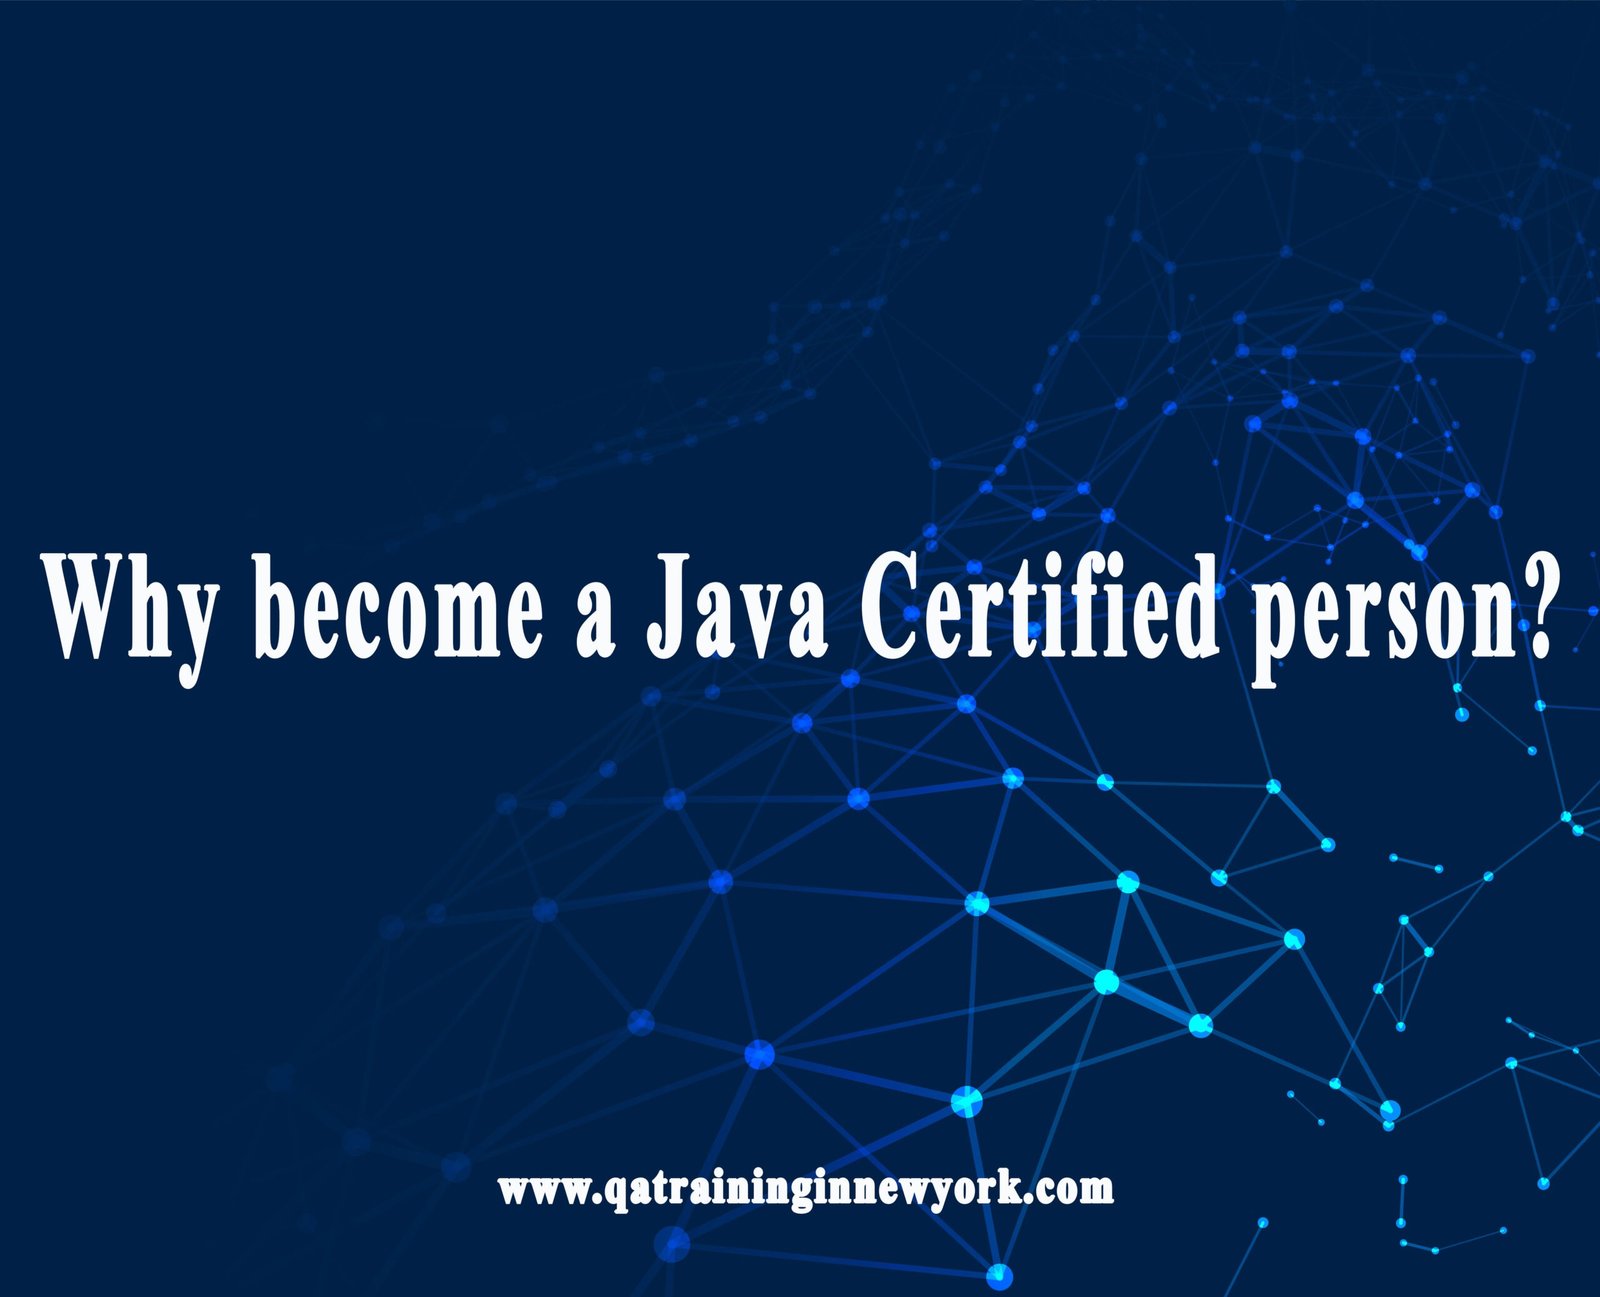 Why become a Java Certified person?